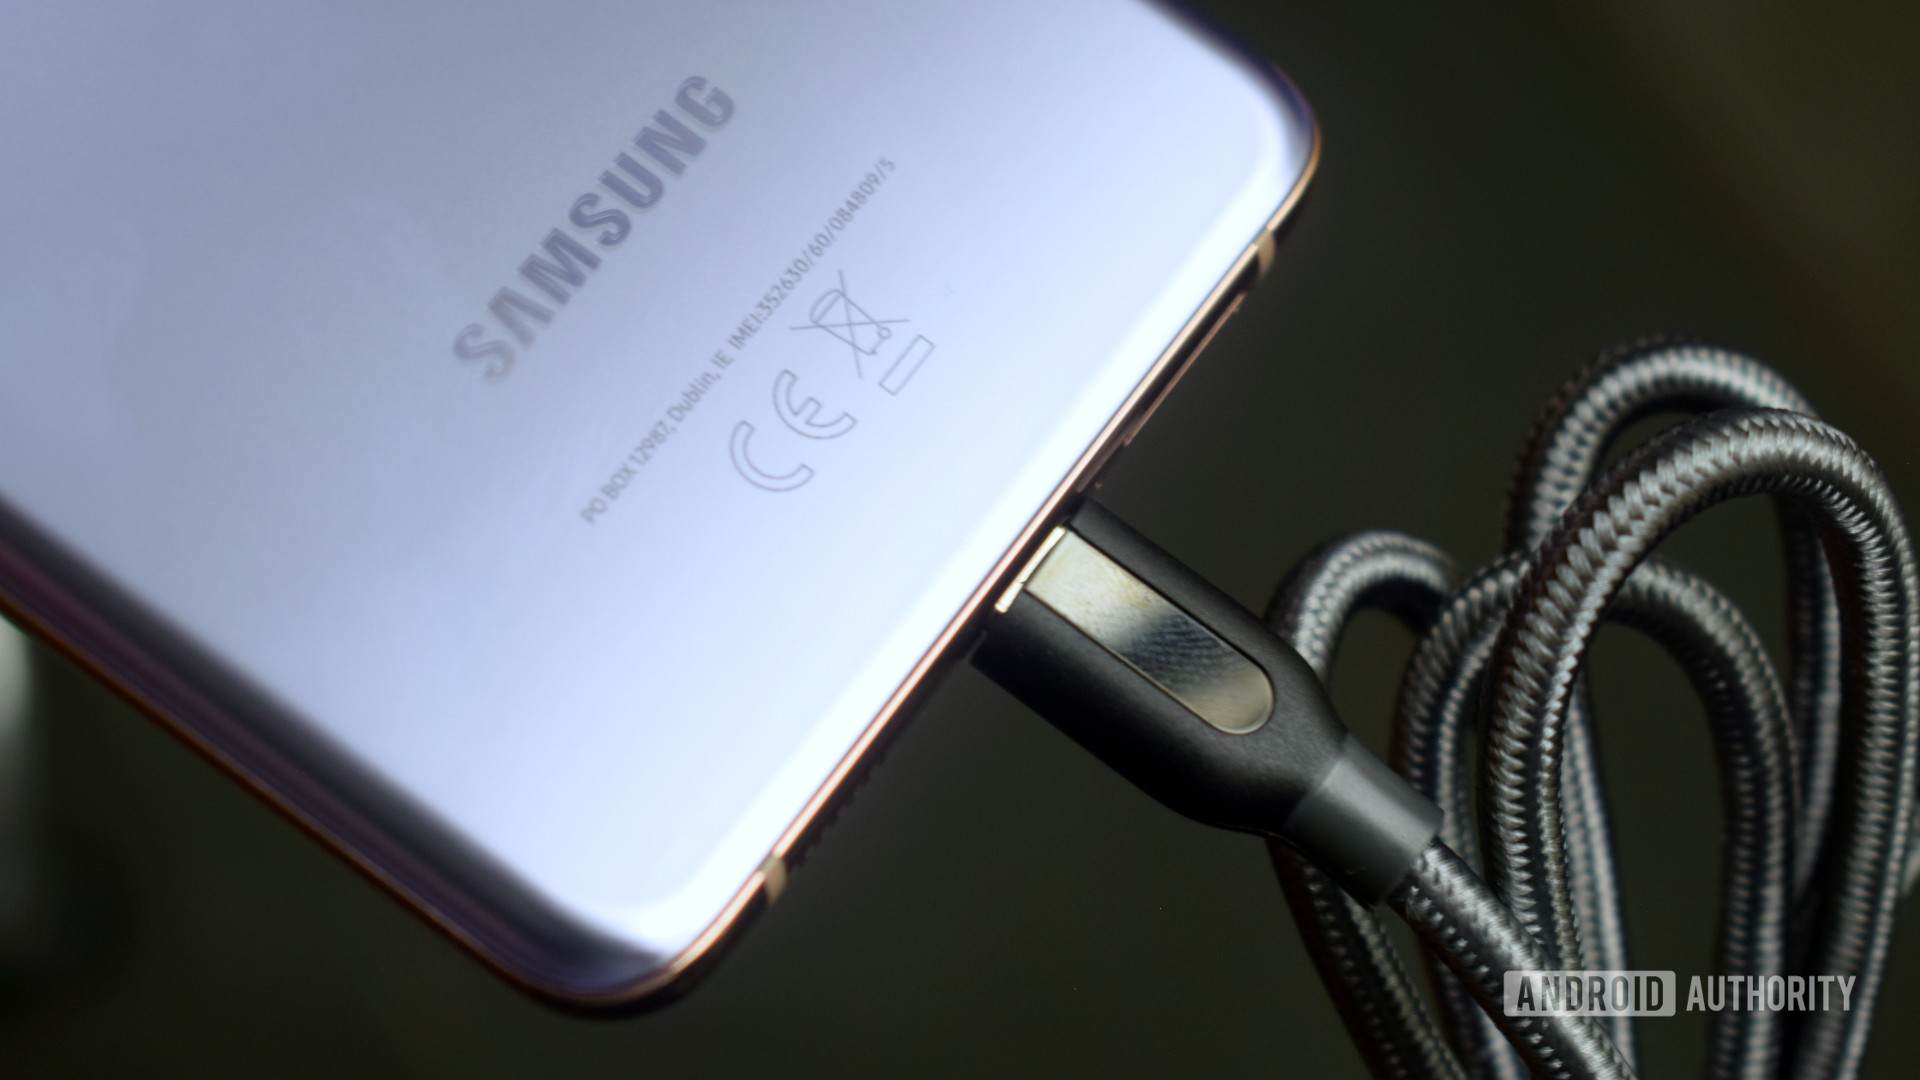 Samsung Galaxy USB Type-C Cable Fast Charging Pack of 4 and more USB-C devices 3A Quick Charger Cord Type C to A Cable Compatible with Huawei Xiaomi 